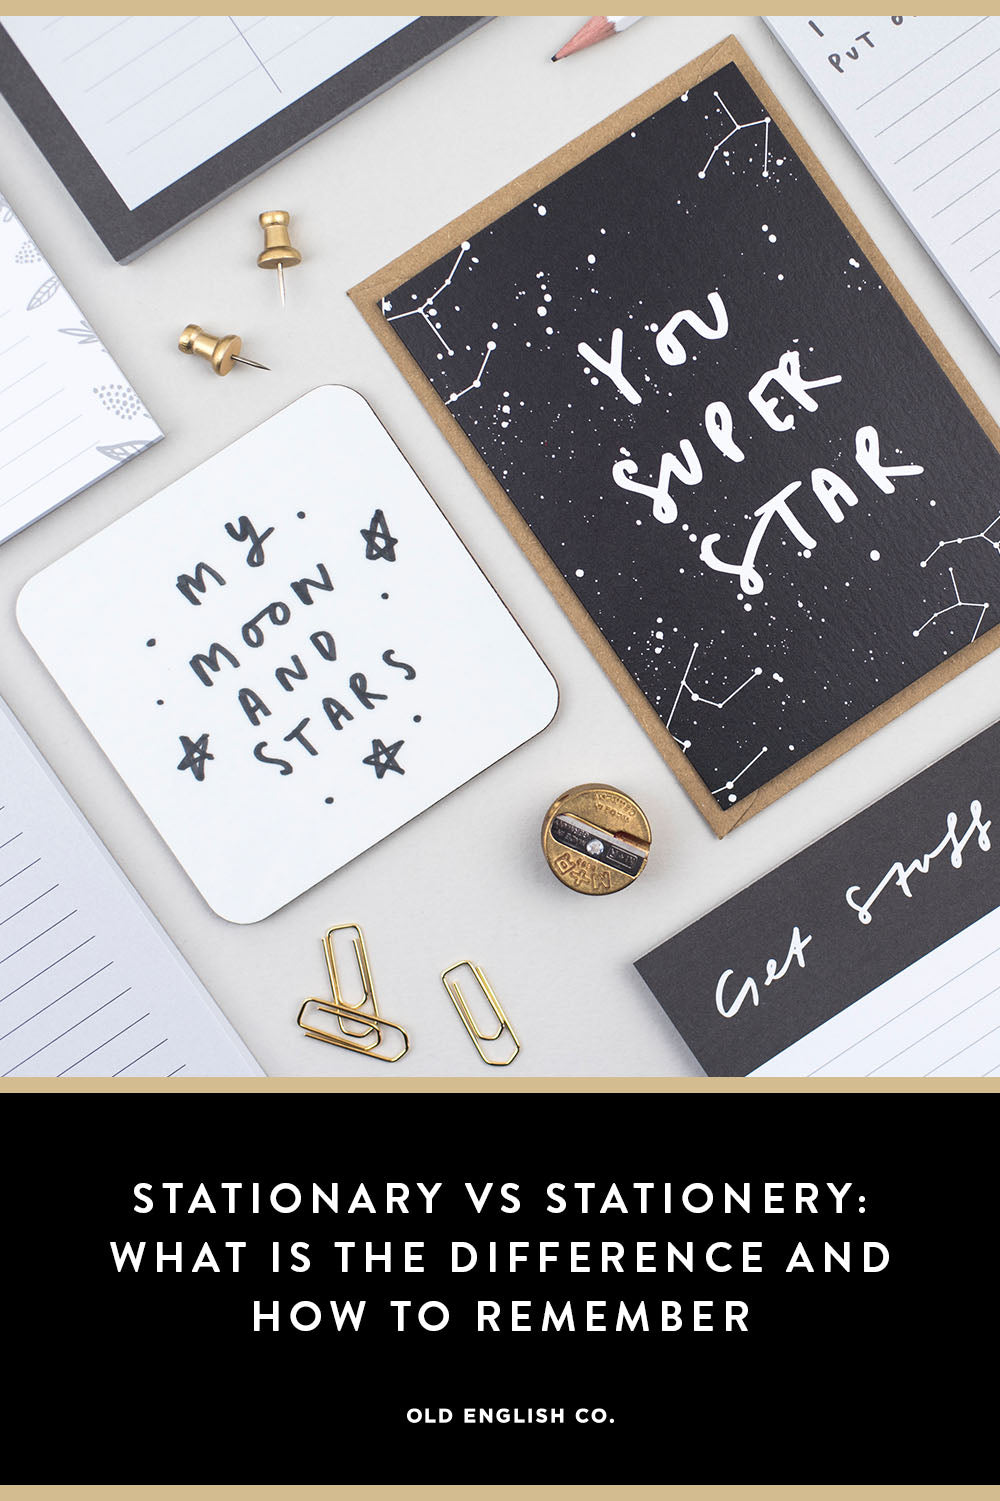 Stationary vs Stationery: What is the difference and how to remember